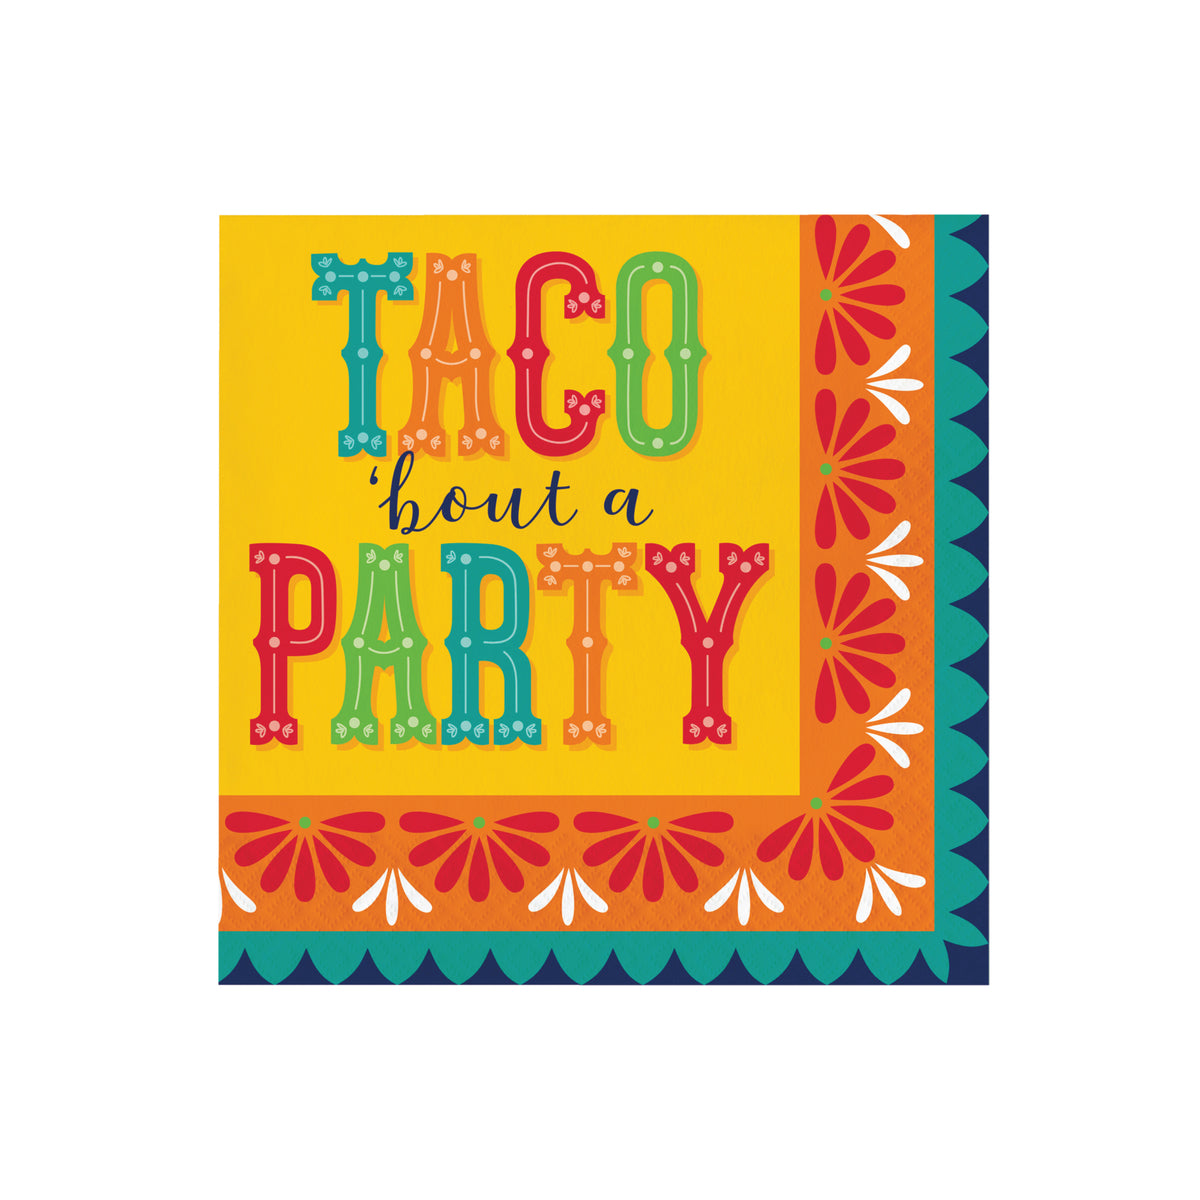 Mexican Fiesta Party Decorations - Cinco De Mayo - 6 Paper Fans, 5 Flowers  Pom Poms, 2 Papel Picado, 1 Pennants Garland, Taco Bout Tuesday, Birthday